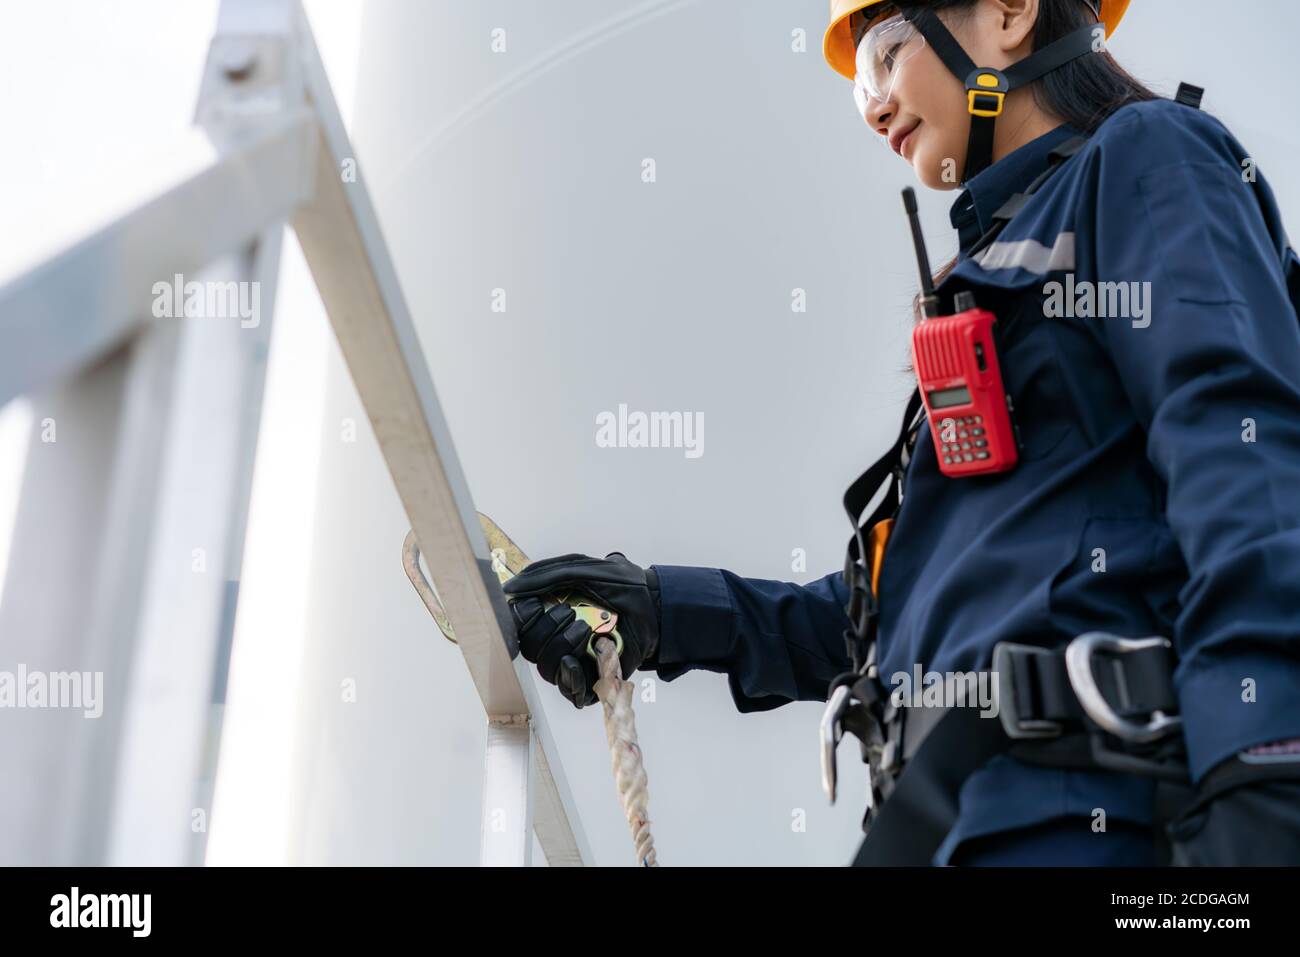 Asian woman Inspection engineer wearing safety harness and safety line working preparing and progress check of a wind turbine with safety in wind farm Stock Photo